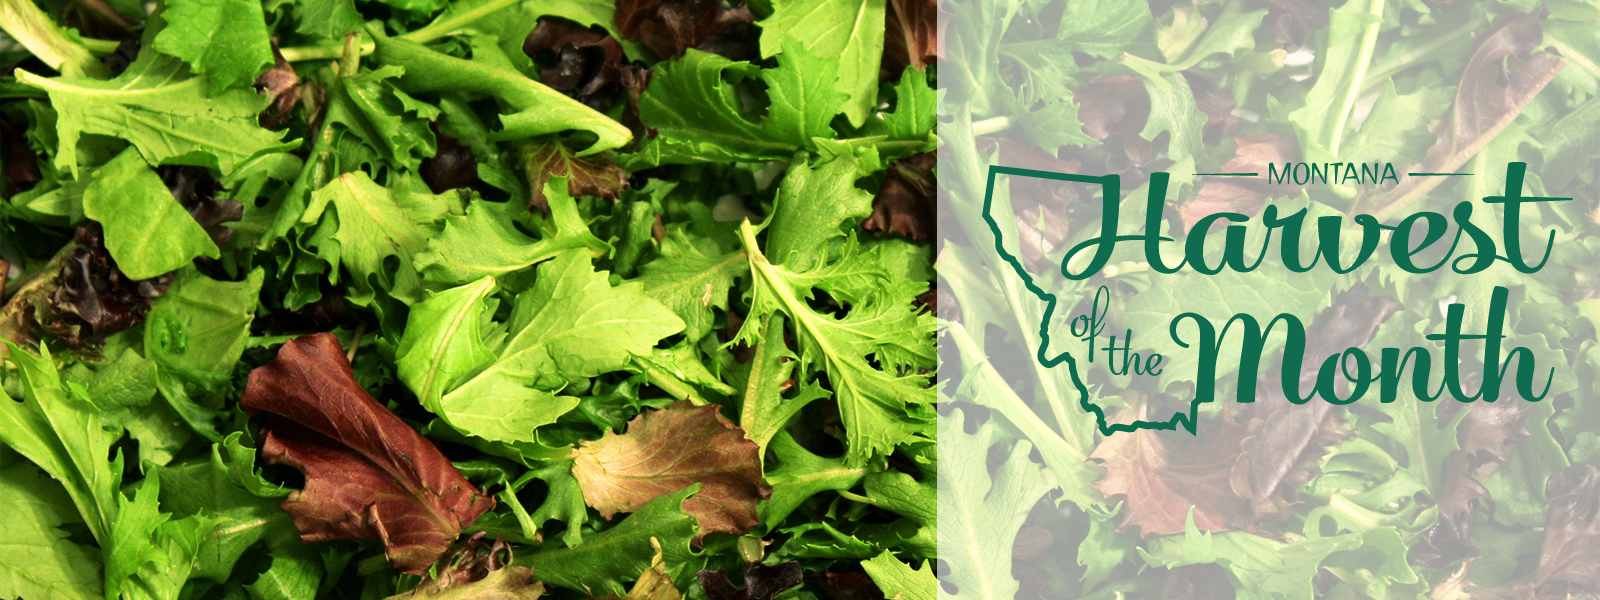 Leafy greens are this month's Montana Harvest of the Month!